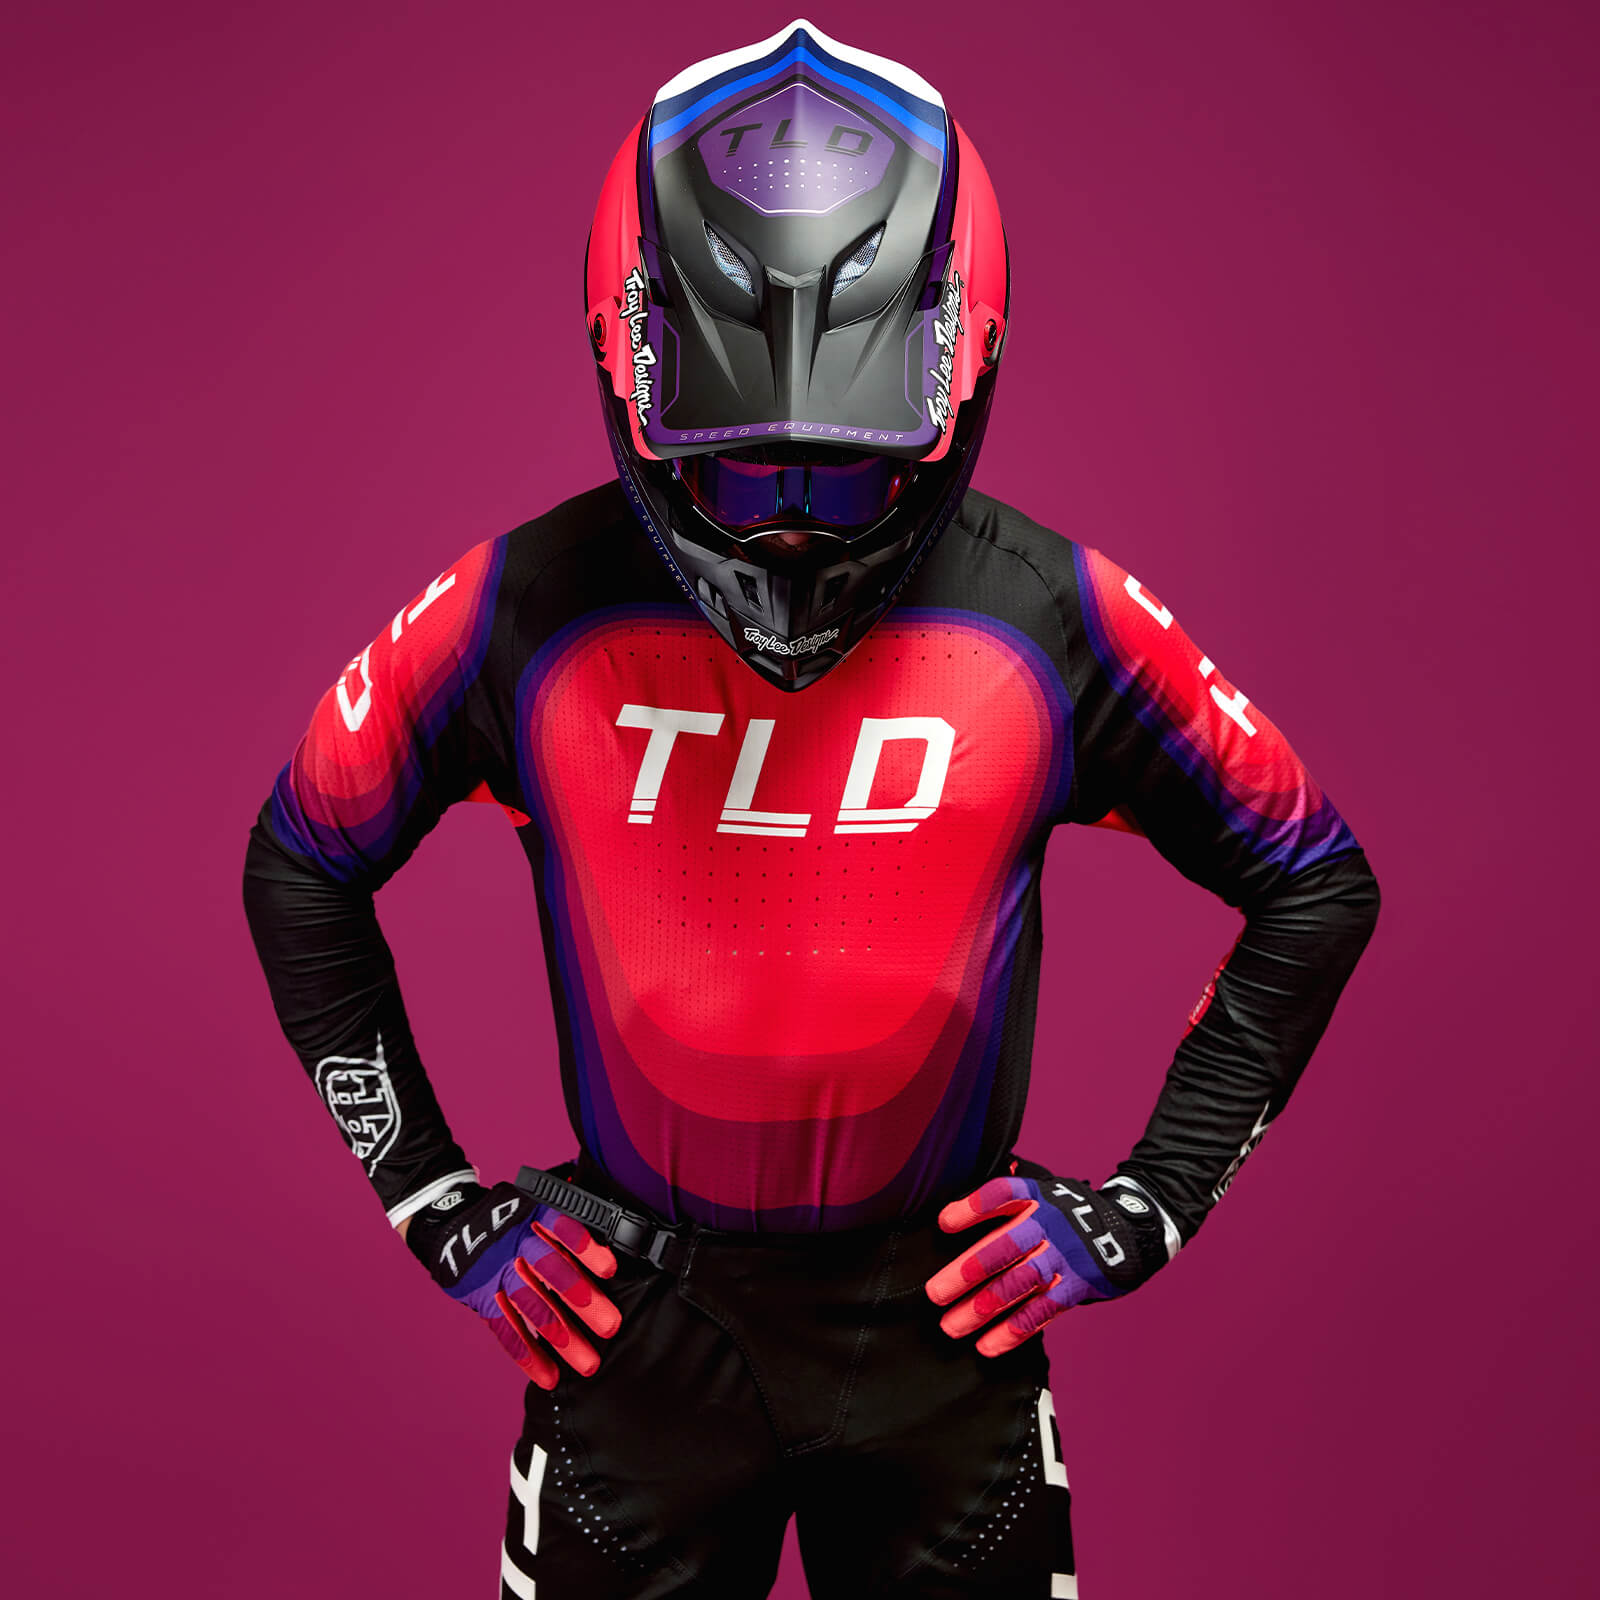 Troy Lee Designs: Technical clothing for motorbikes and bikes